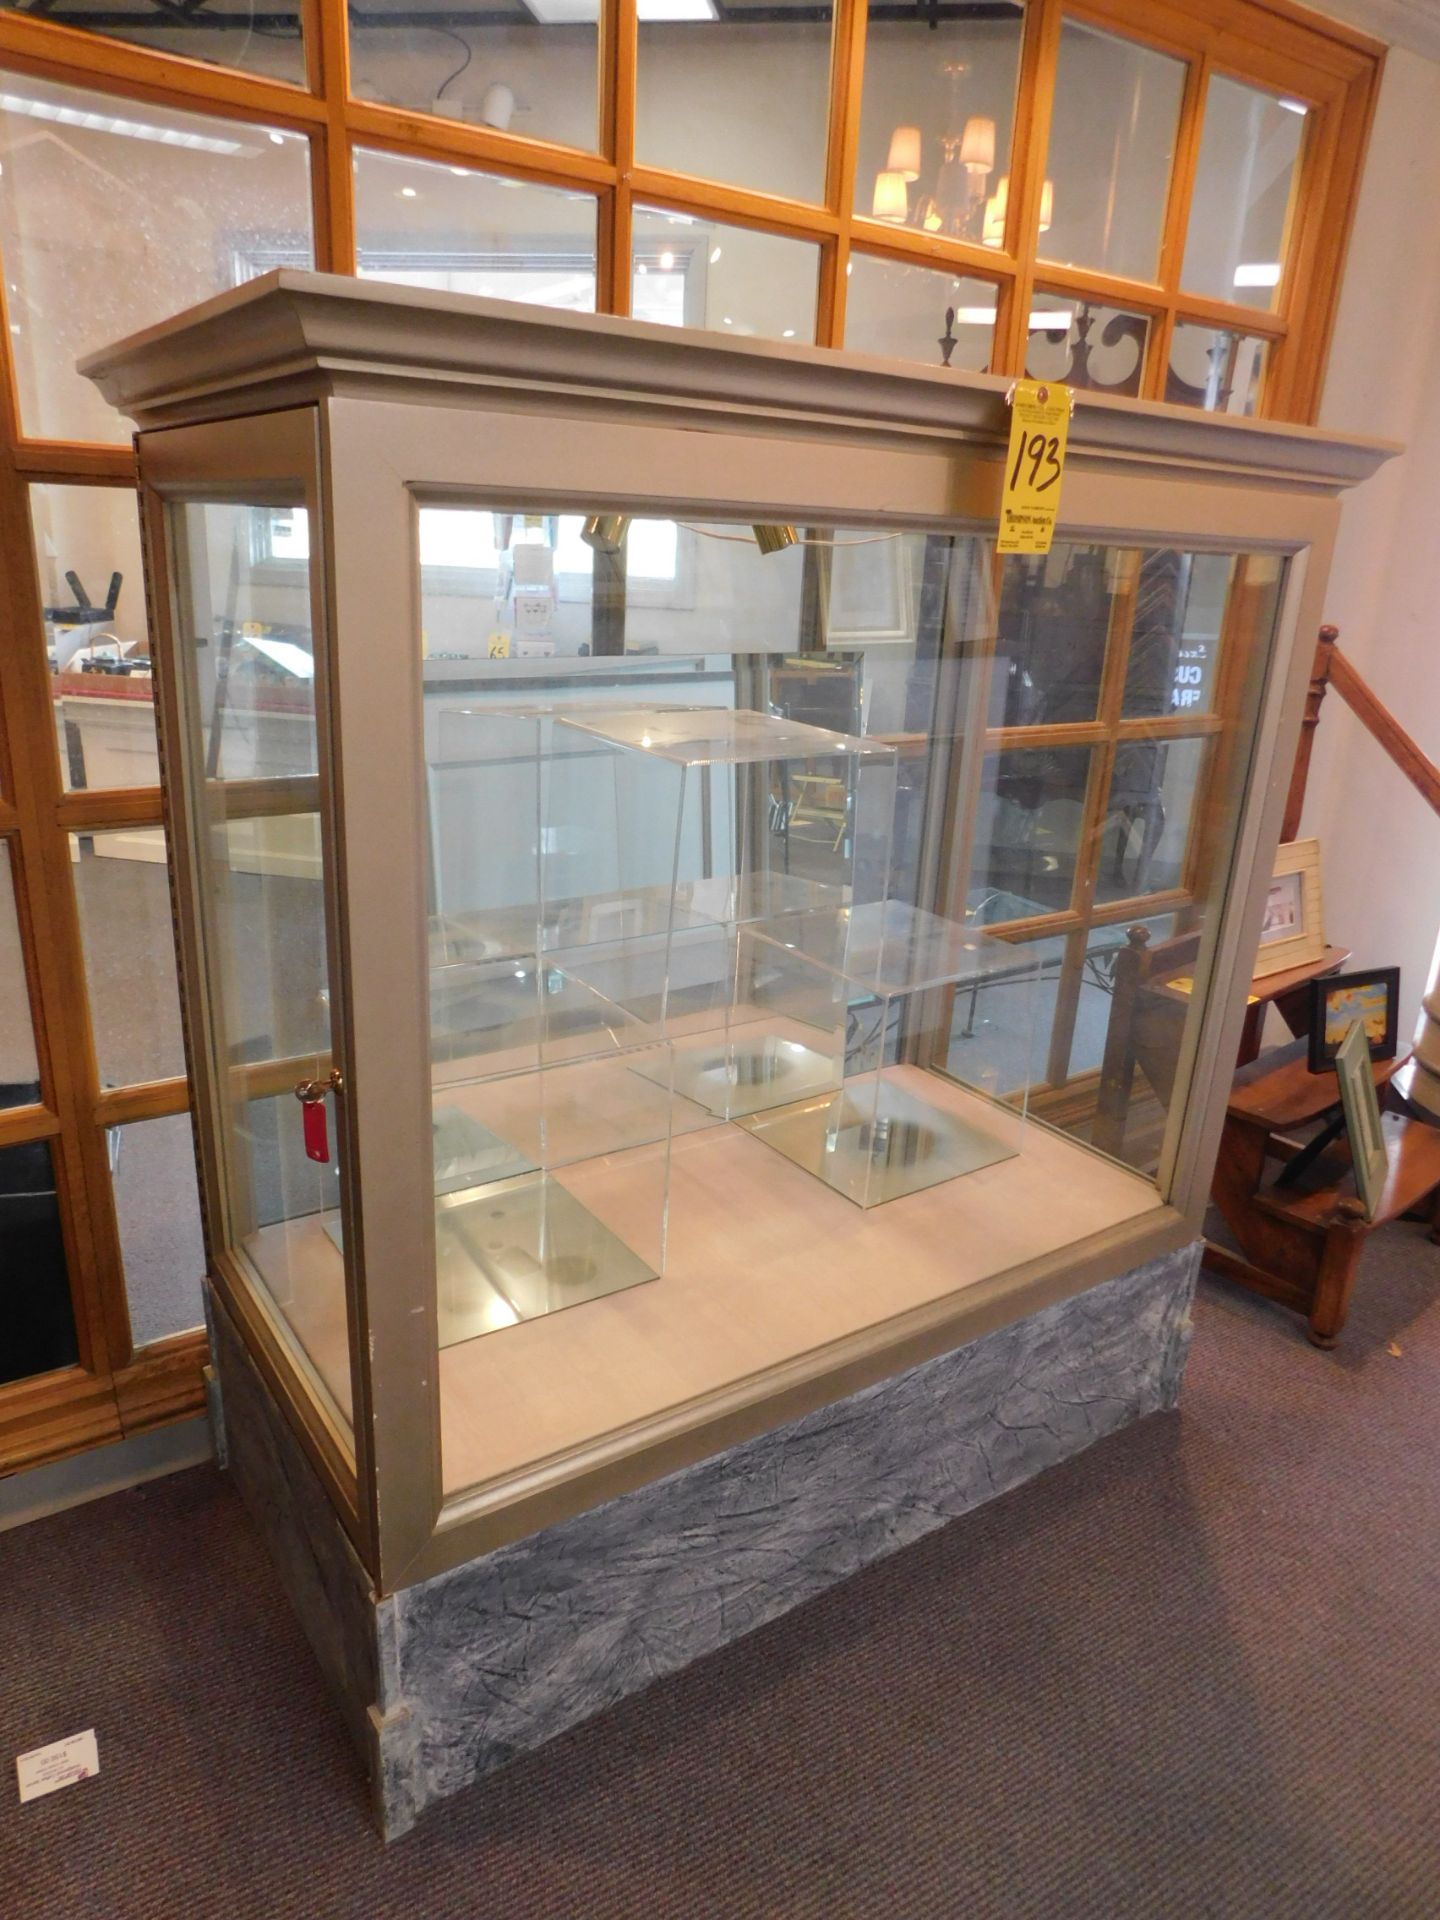 48"Glass Display Case, 60" High - Image 2 of 4